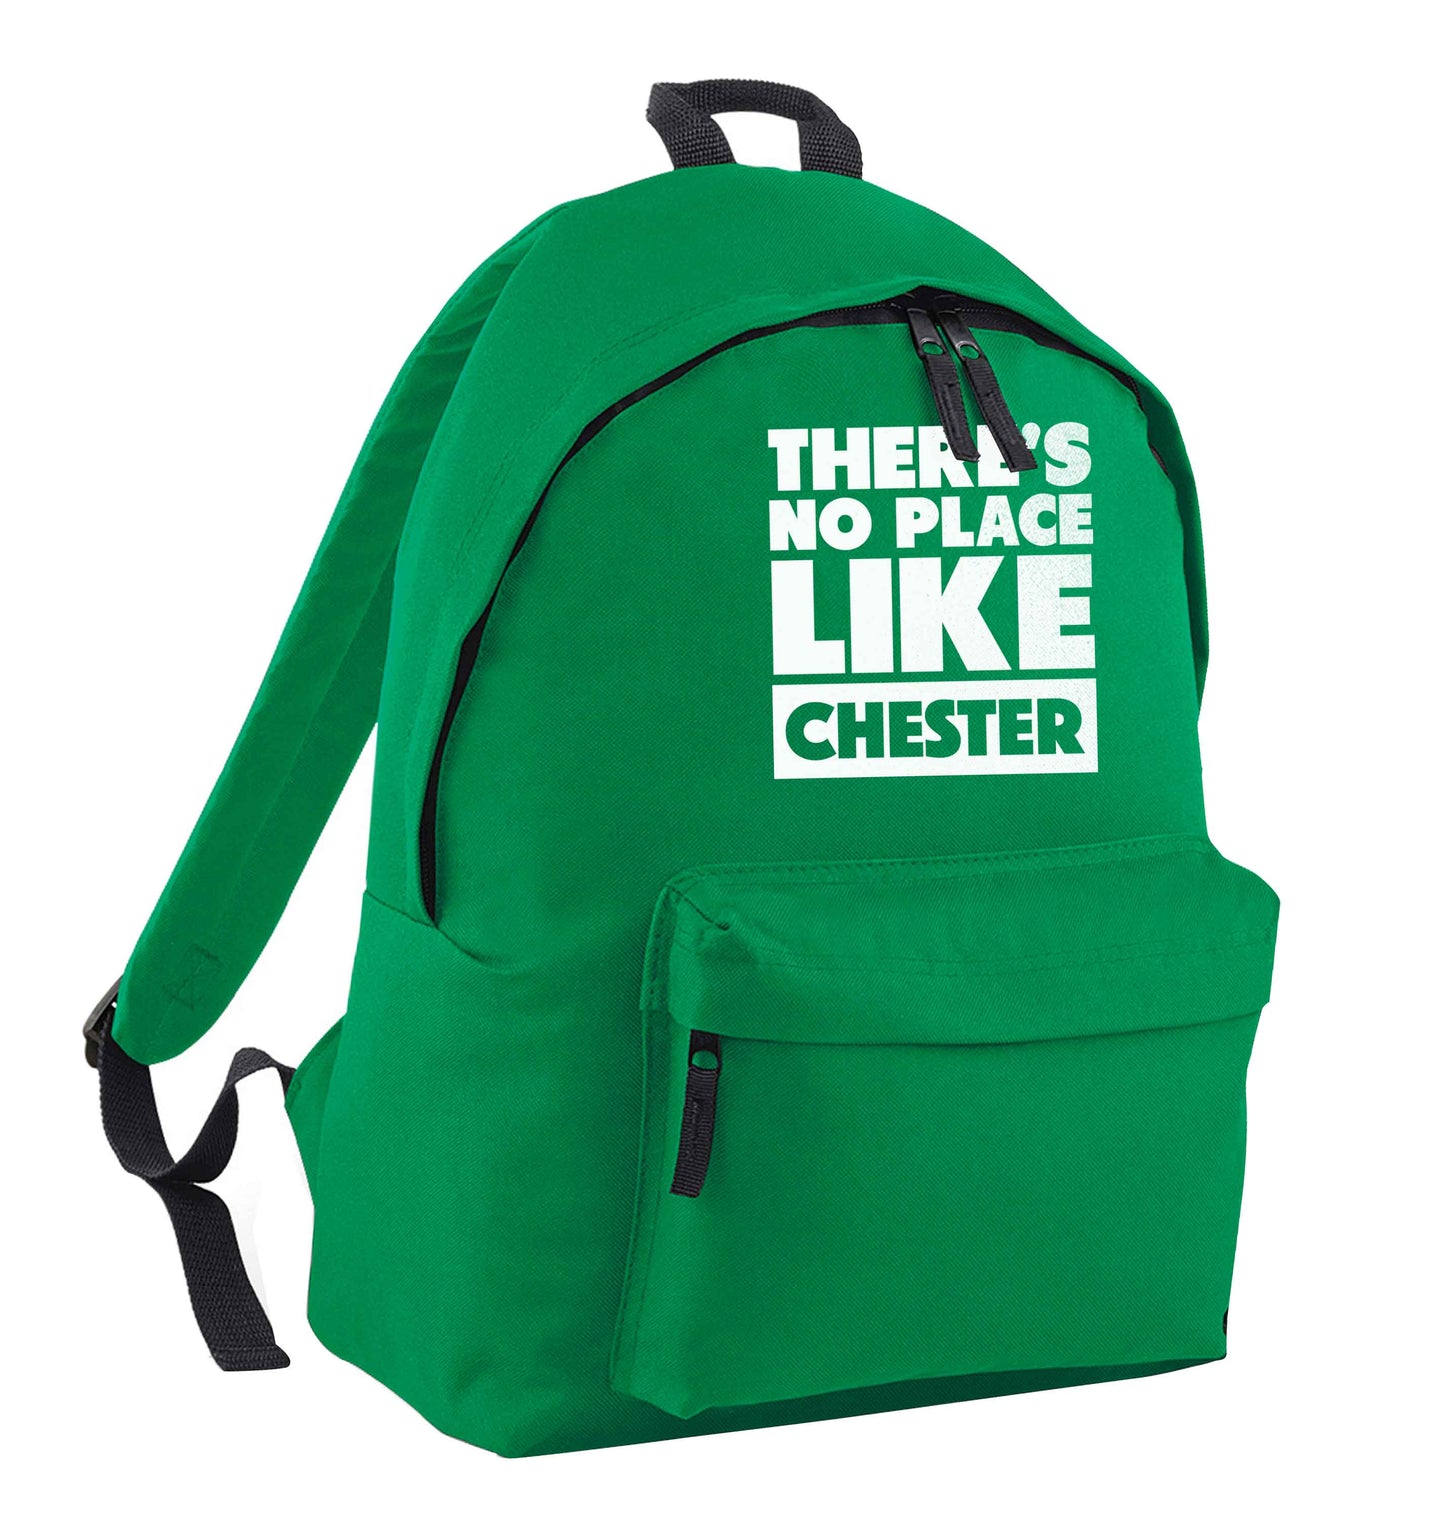 There's no place like Chester green adults backpack